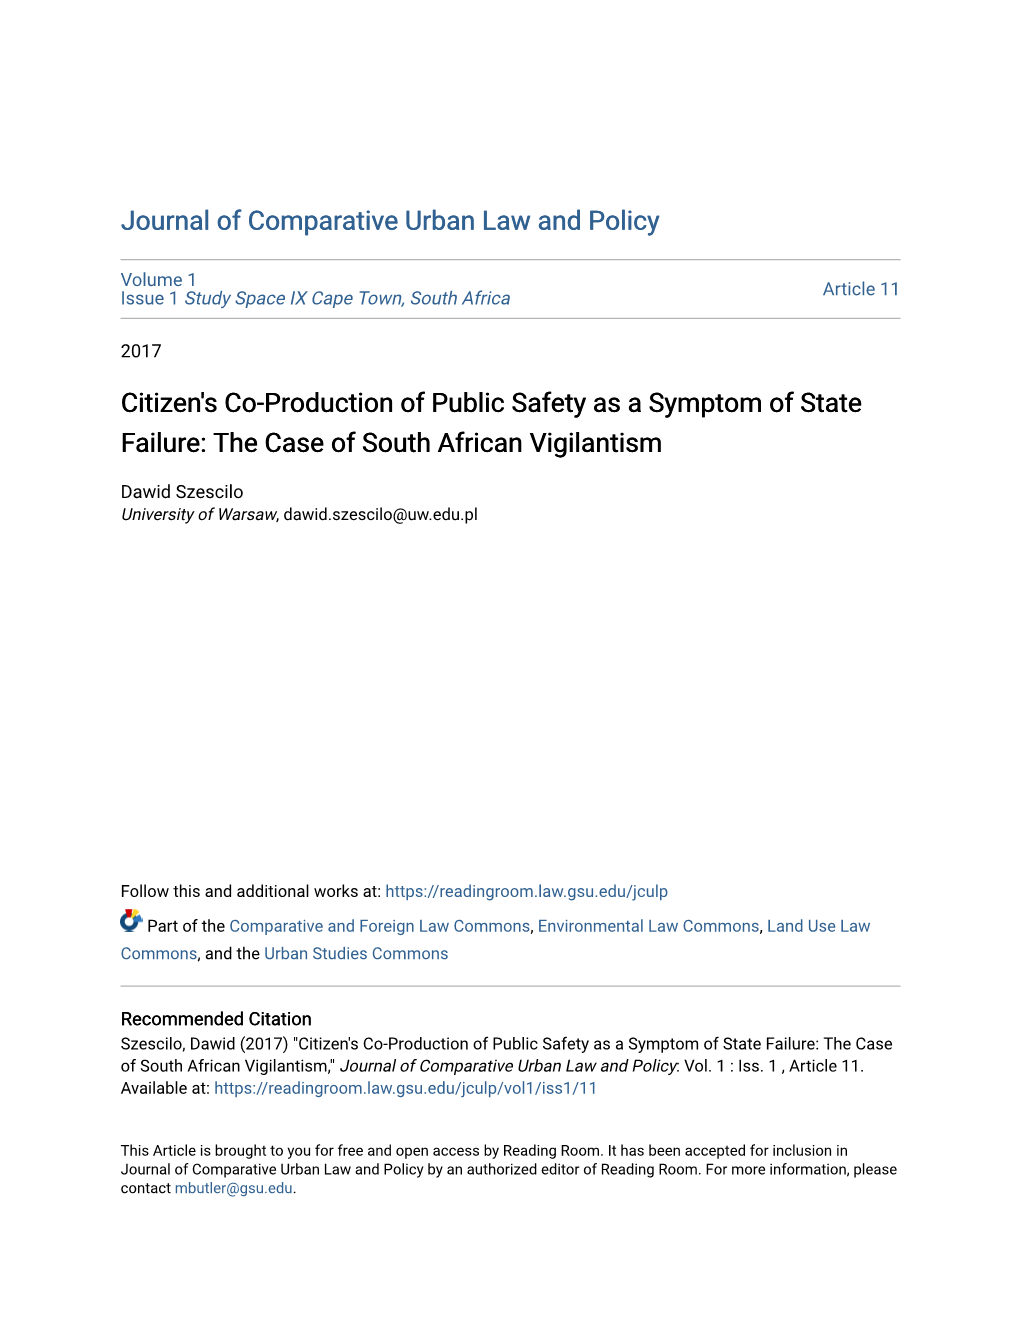 Citizen's Co-Production of Public Safety As a Symptom of State Failure: the Case of South African Vigilantism